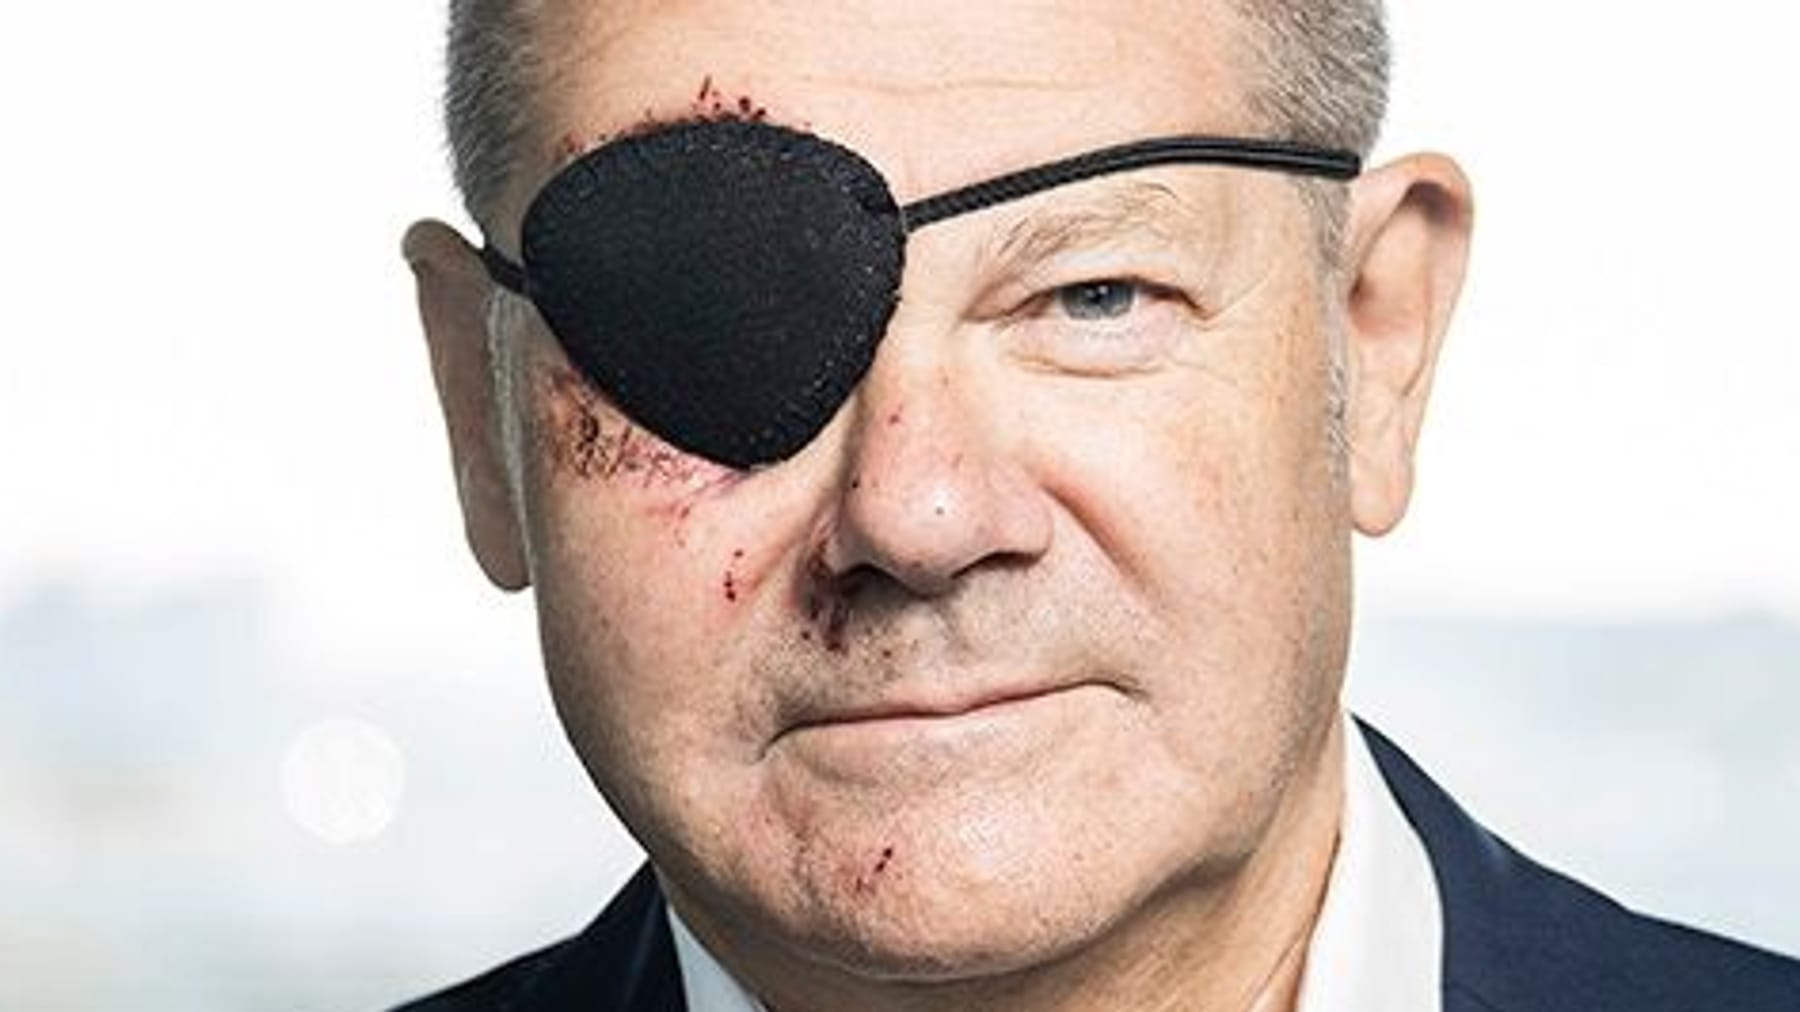 Chancellor shows up after a fall with an eye patch - News Directory 3